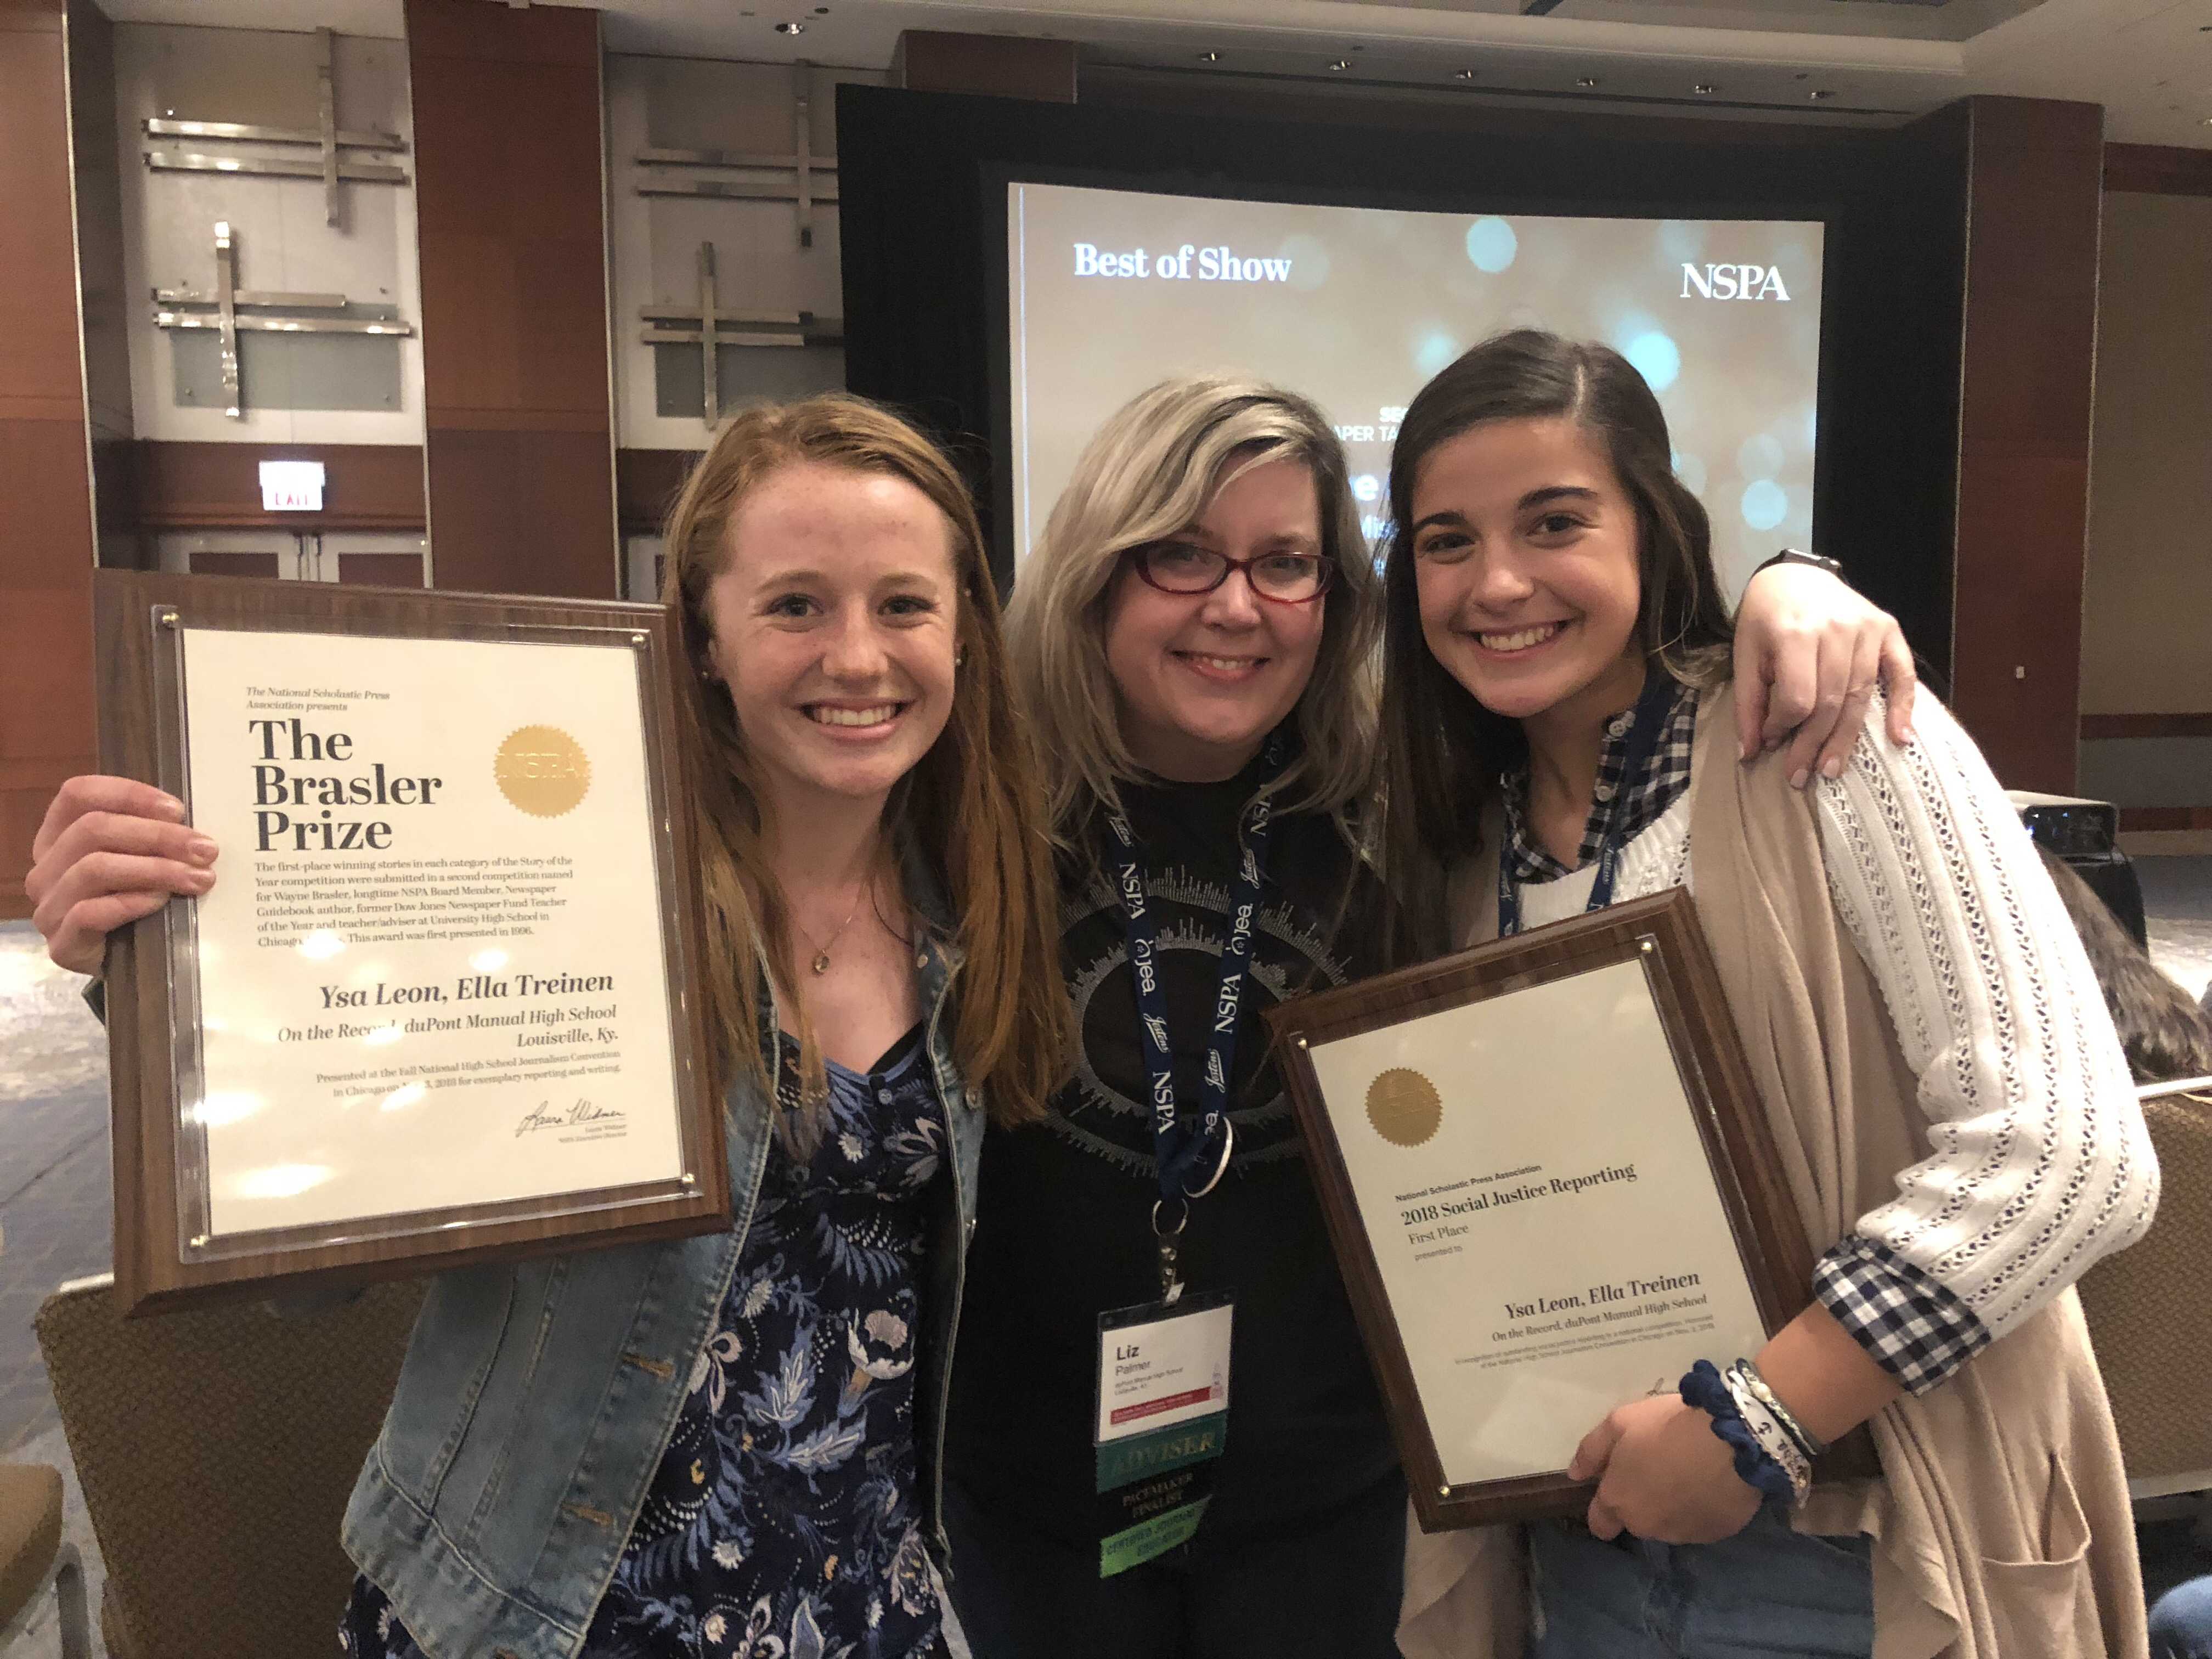 Ella Treinen (11, J&C) and Ysa Leon (11, J&C) pose with their adviser, Ms. Liz Palmer (J&C) after accepting the Brasler Prize and Social Justice Reporting Story of the Year. Photo by Stephen Leon.